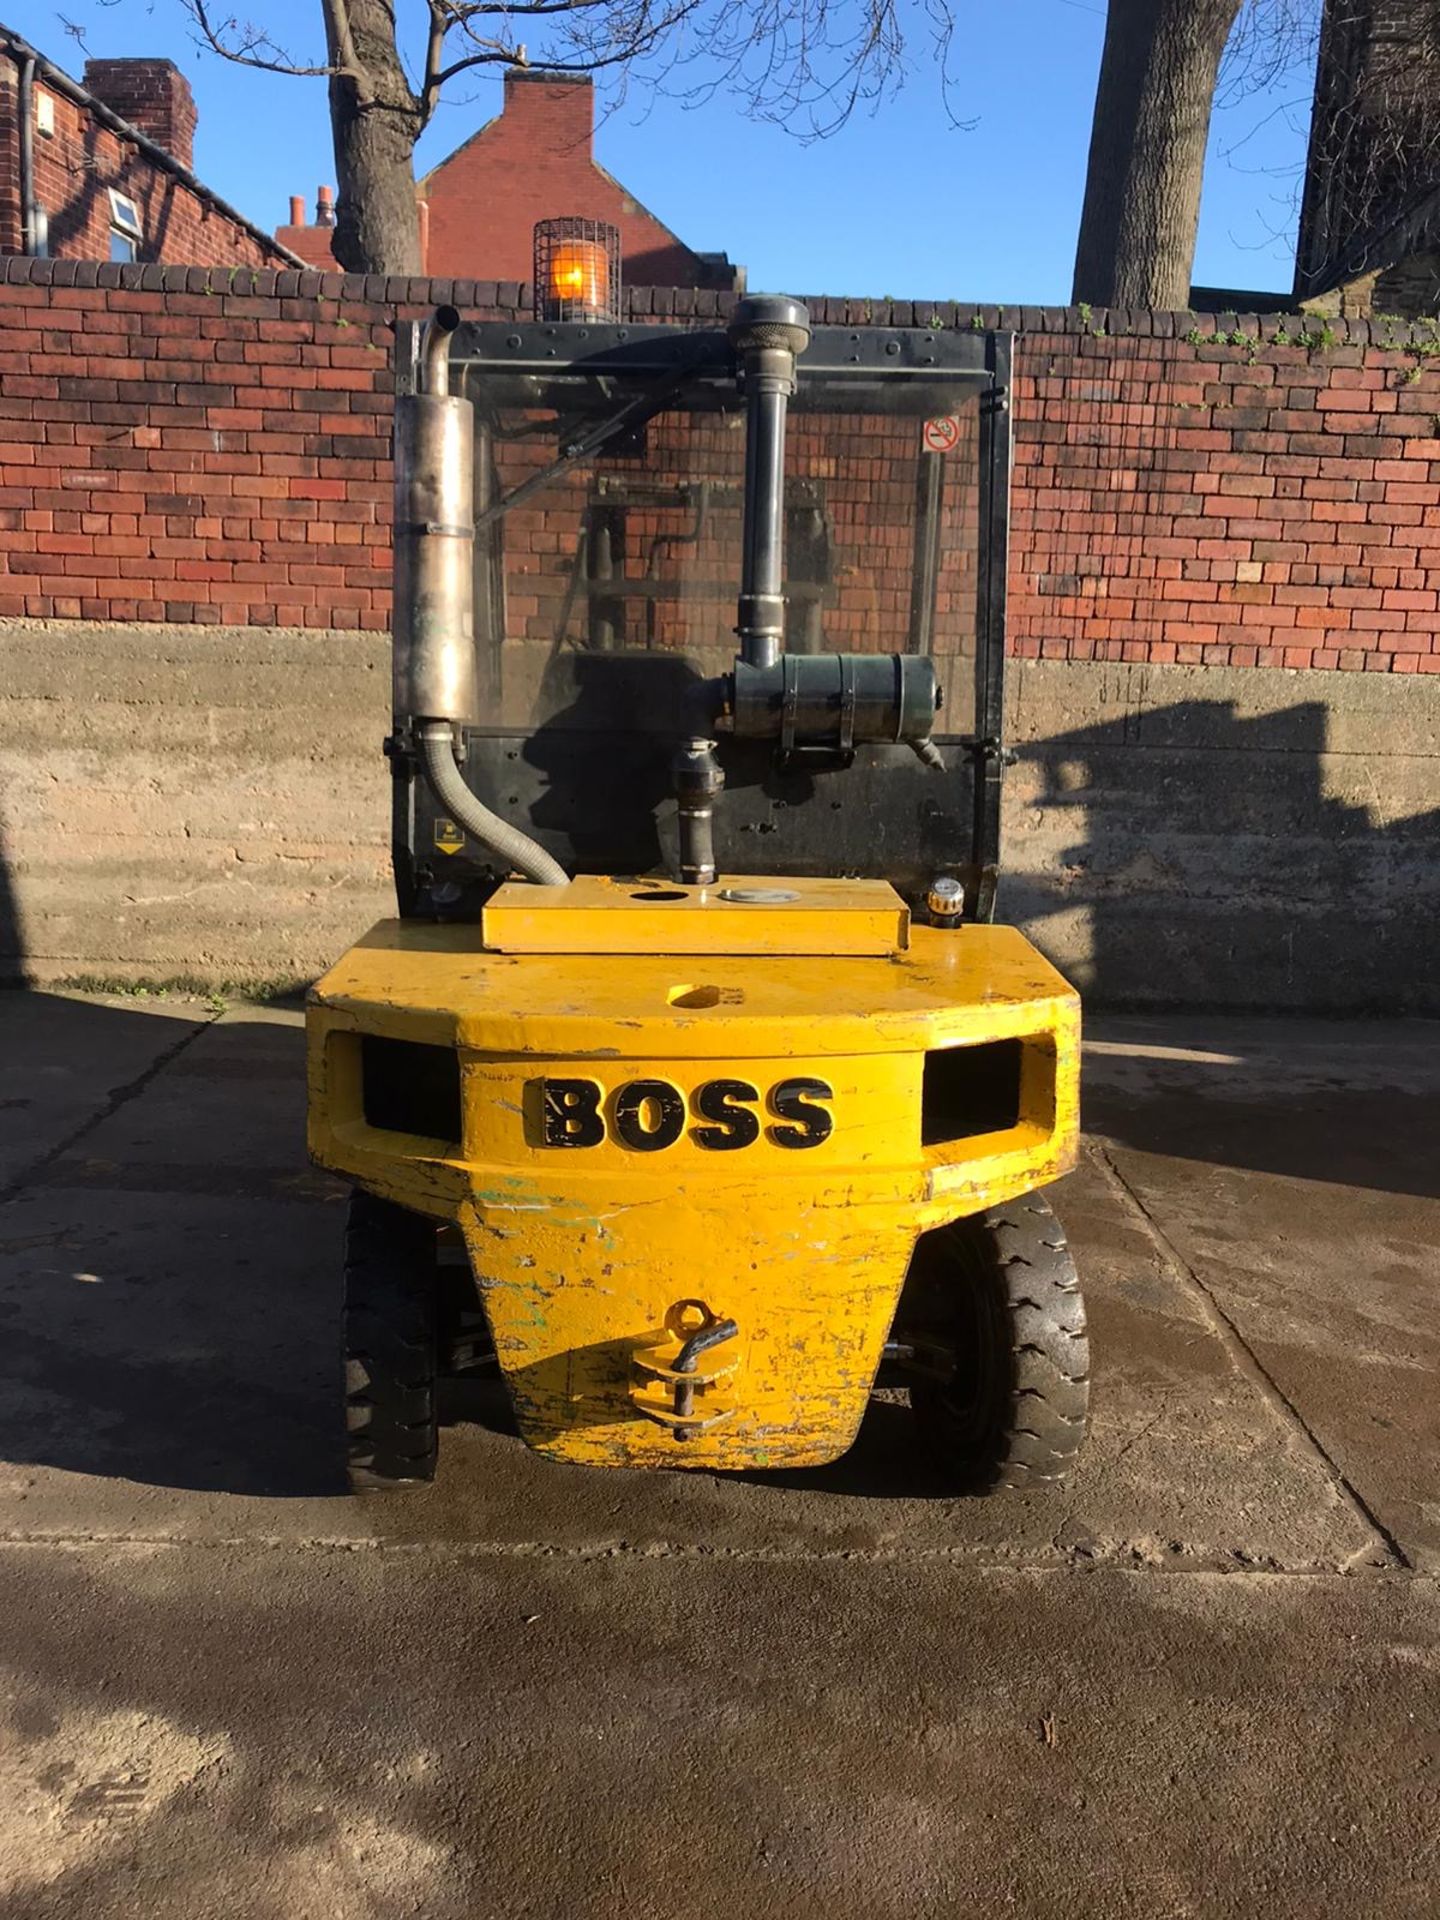 BOSS FORKLIFT 4 TON, FULL WORKING ORDER, C/W FRAZER ENGINE, CONTAINER SPEC, DUPLEX FREE LIFT MAST - Image 4 of 9